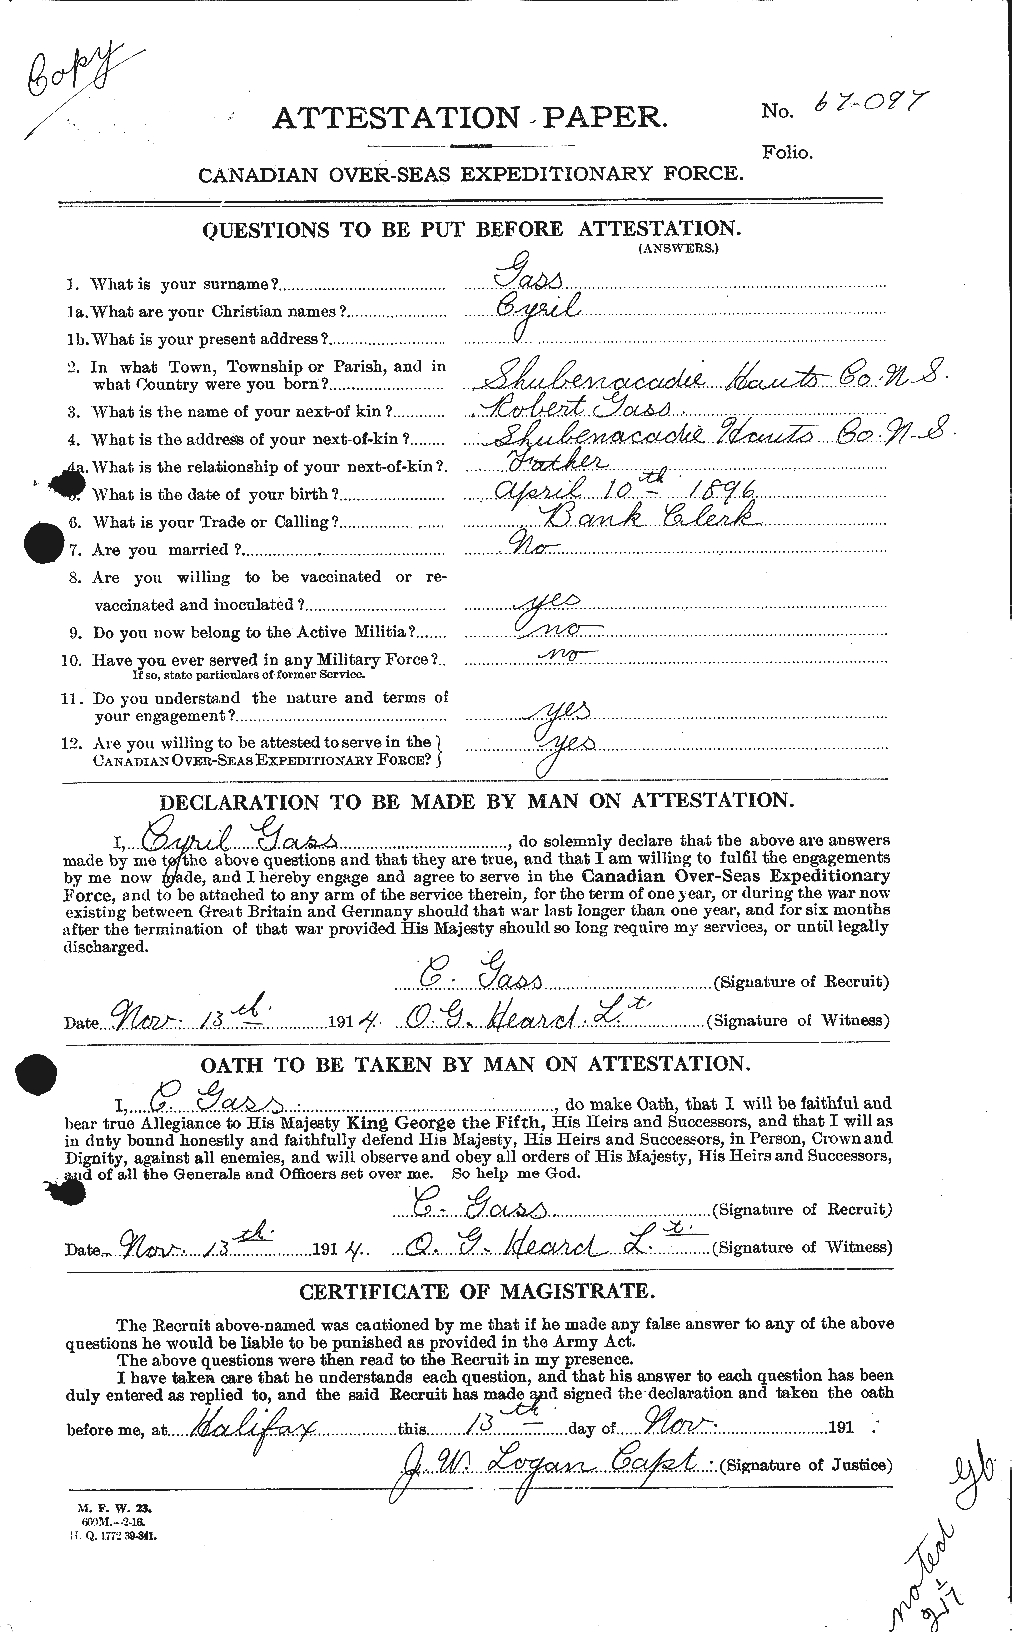 Personnel Records of the First World War - CEF 341602a